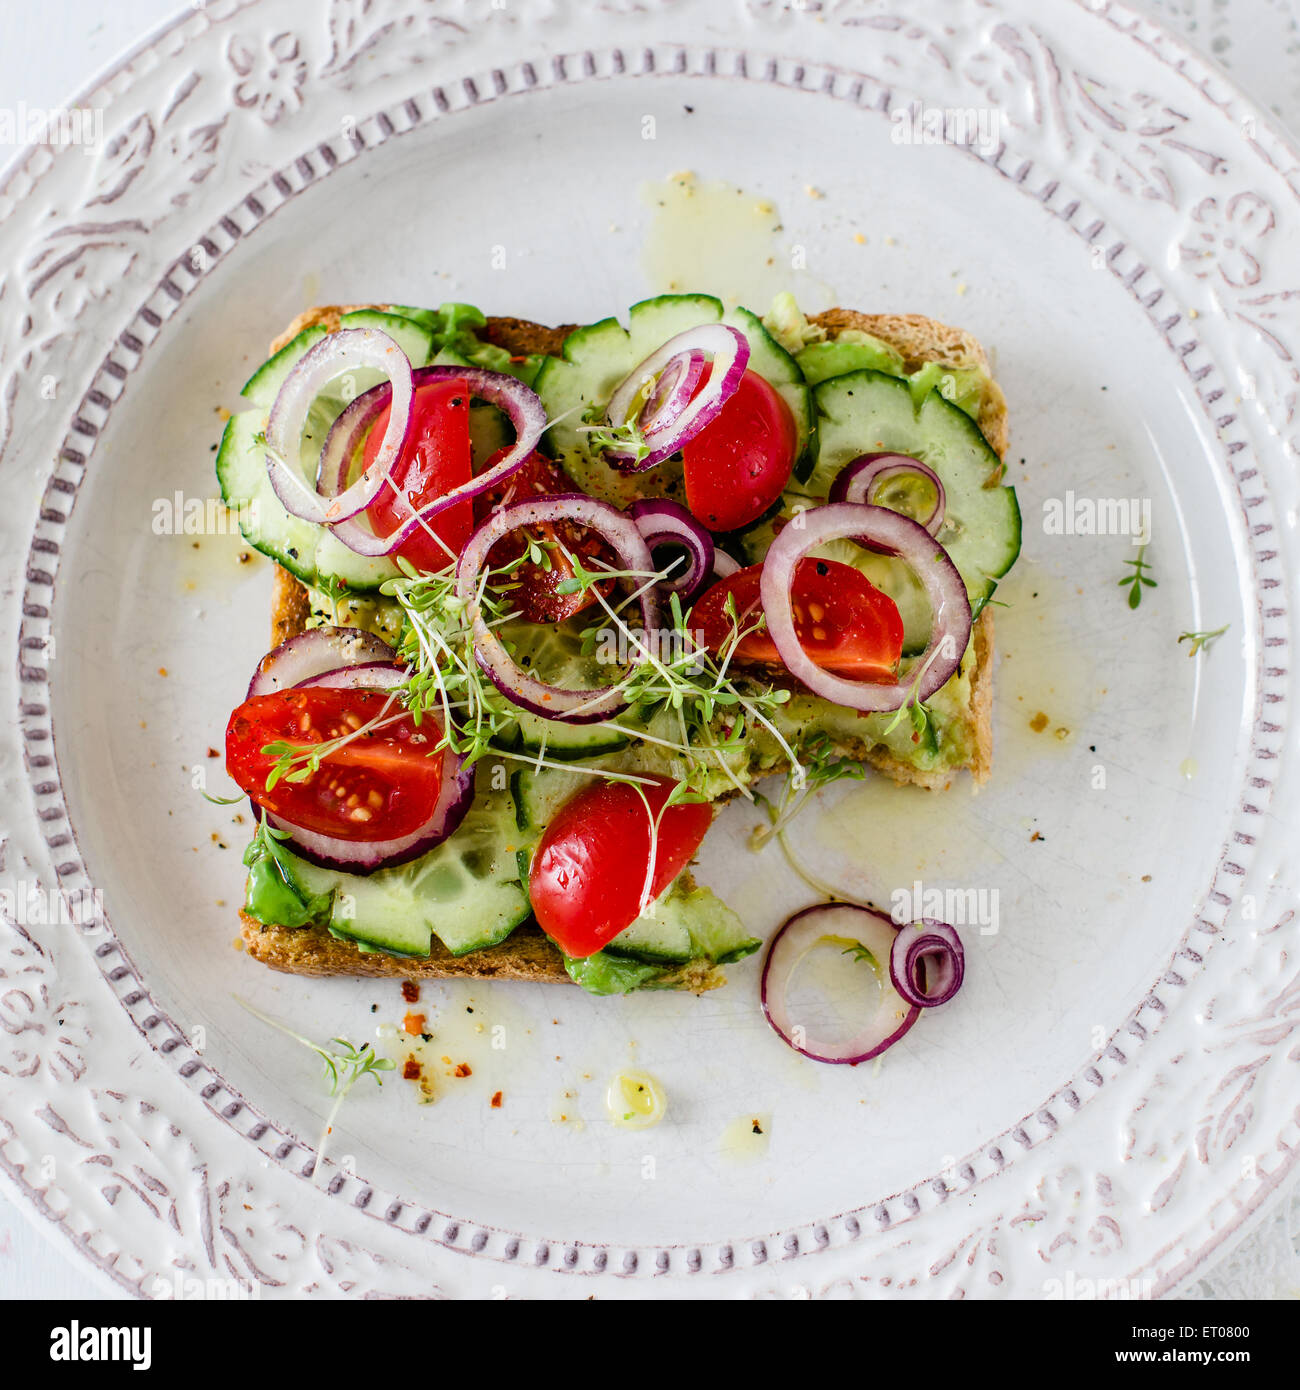 vegan sandwich with avocado and vegetables, missing one bite. Stock Photo